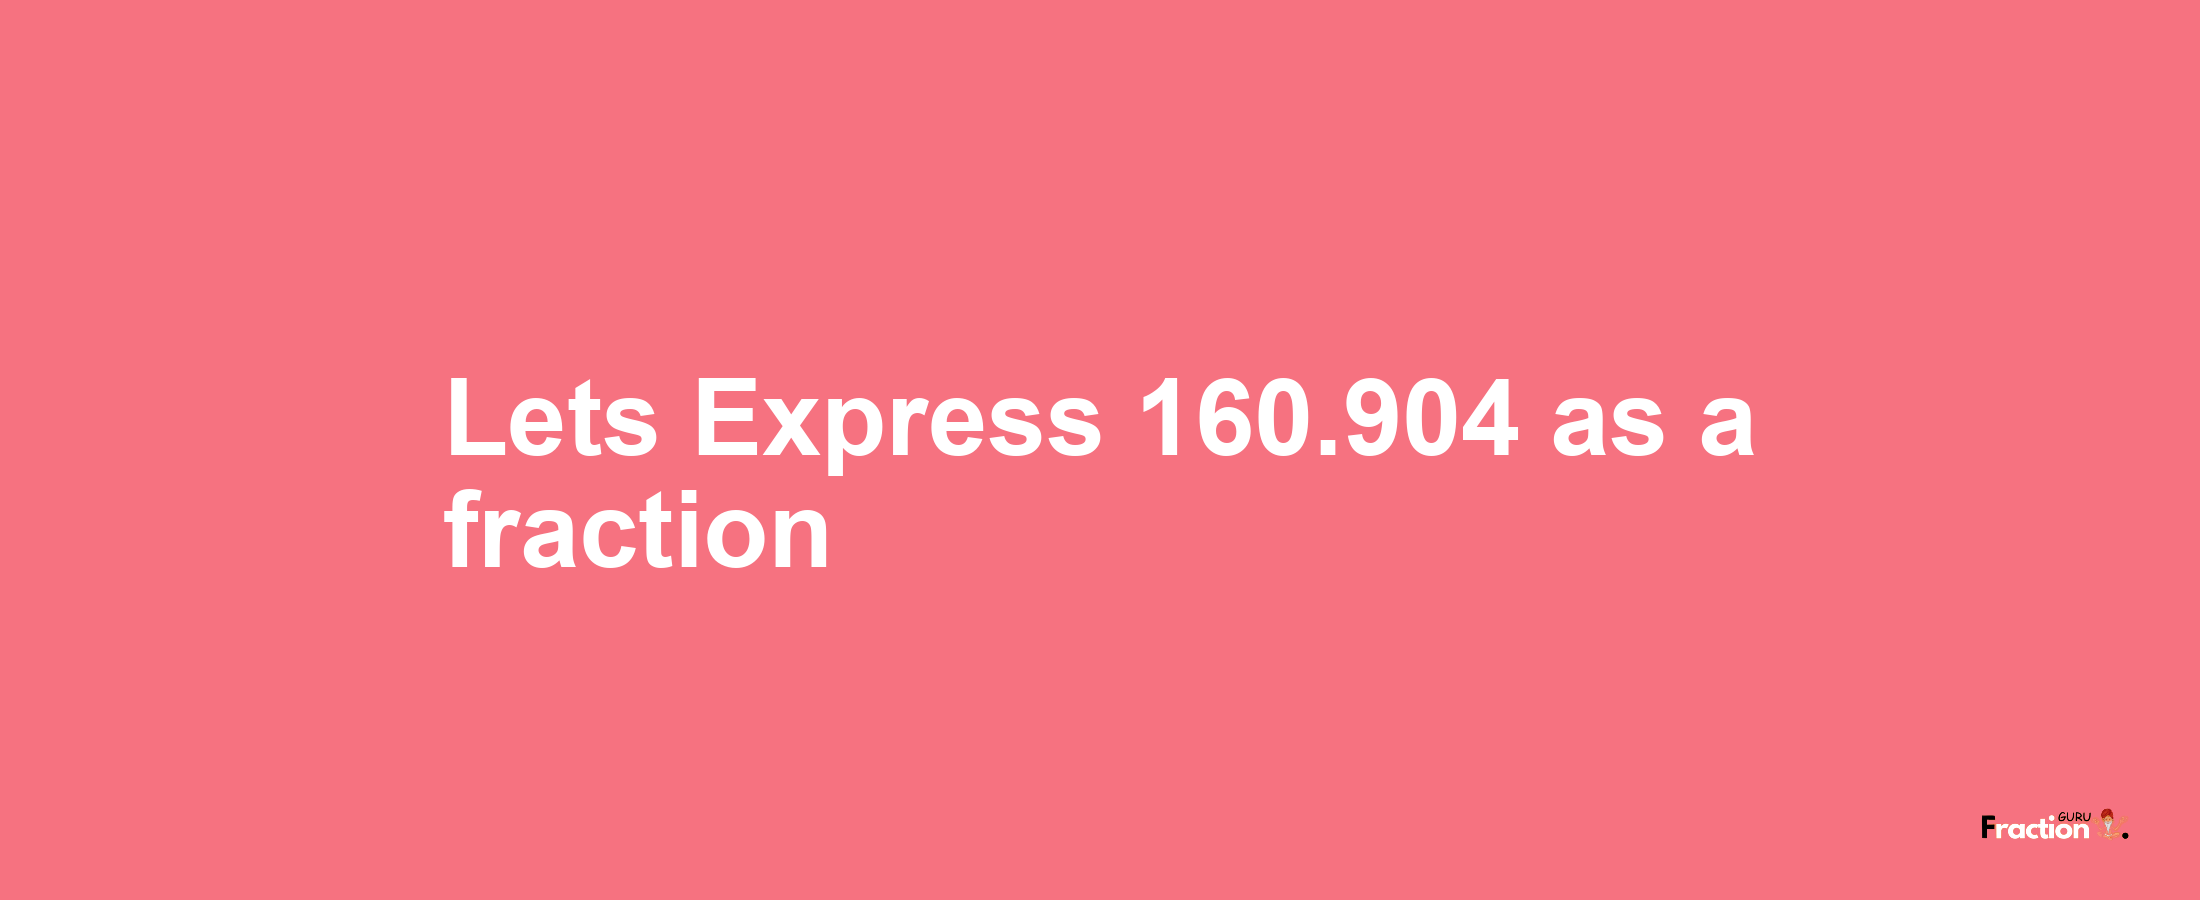 Lets Express 160.904 as afraction